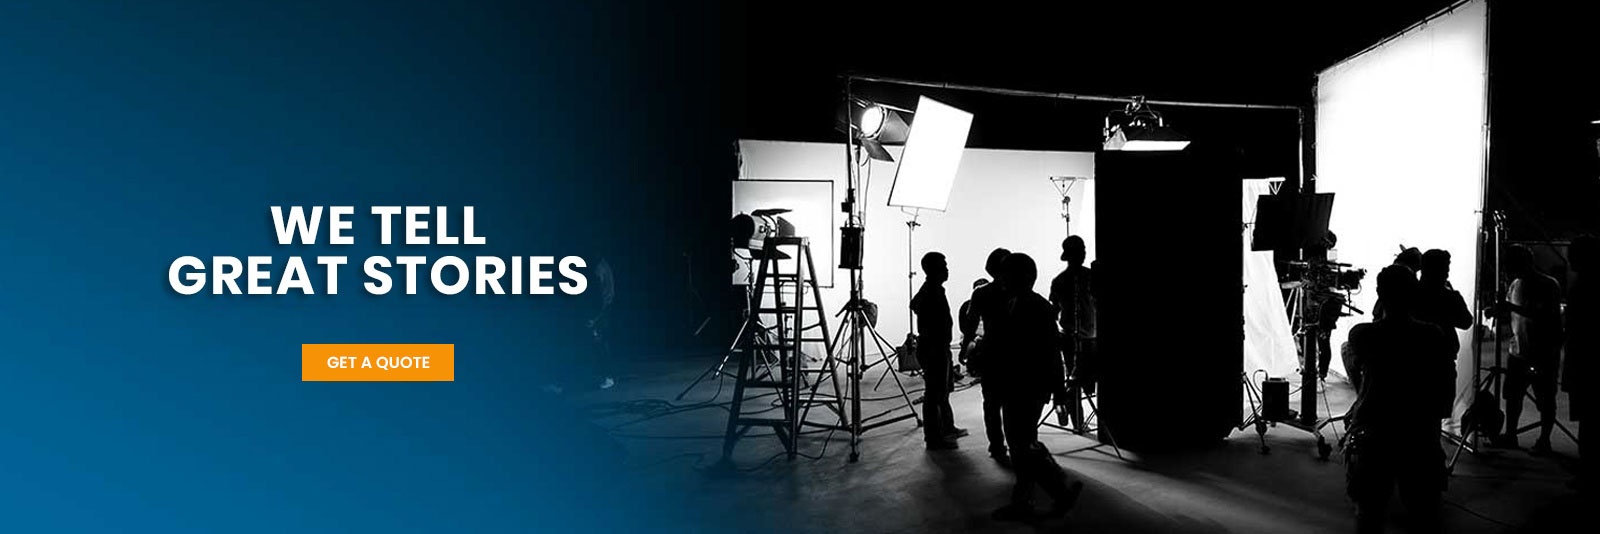 Vancouver Video Production Services by Tetra Films - Video Production Company